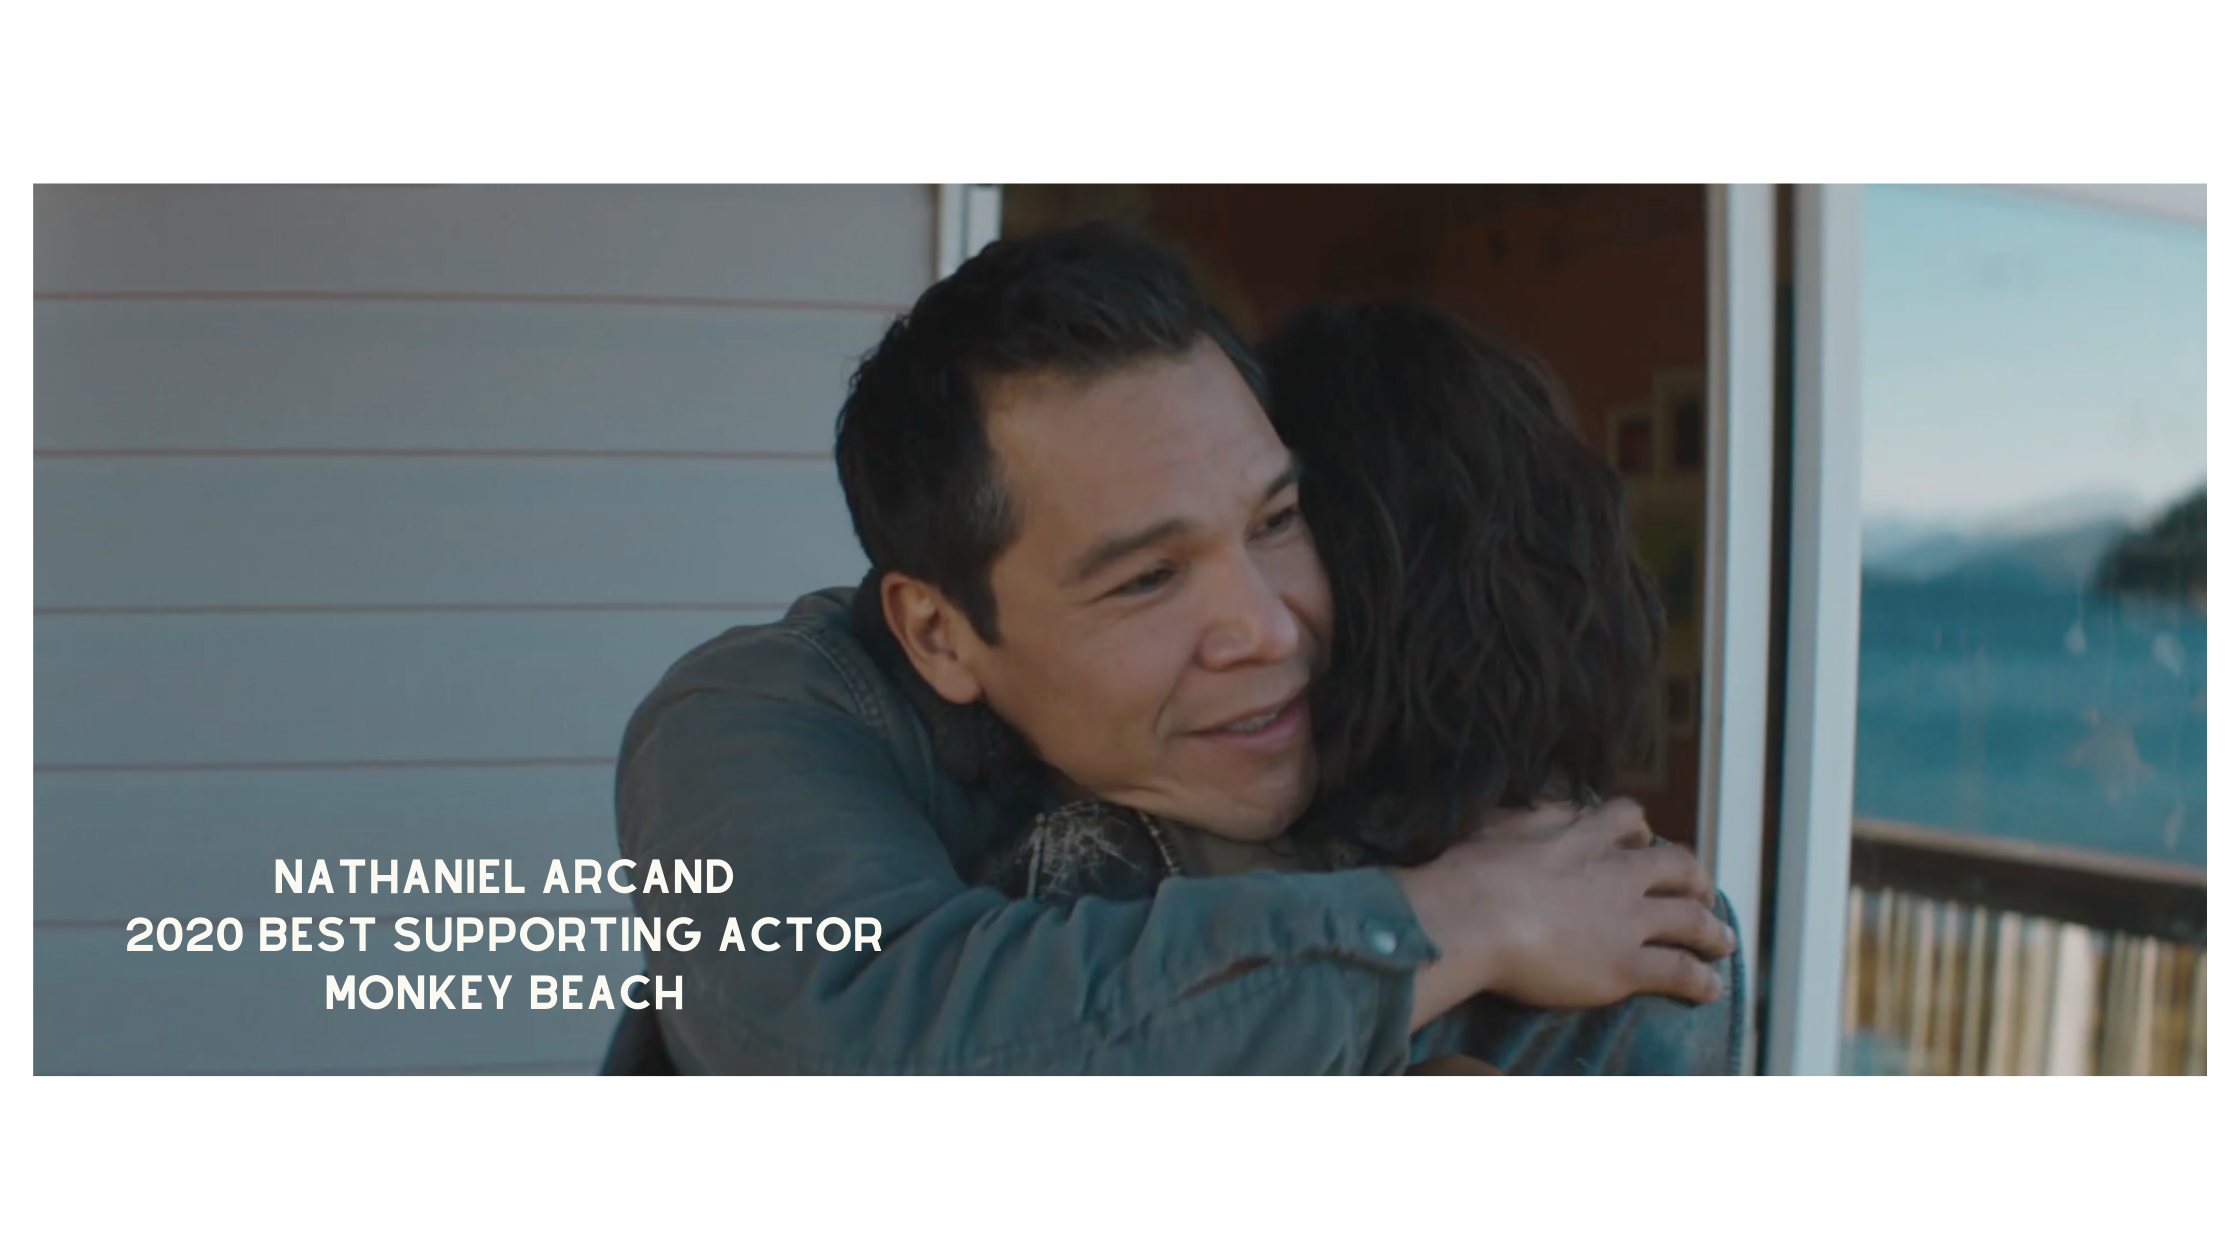 Nathaniel Arcand 2020 Best Supporting actor monkey beach.png